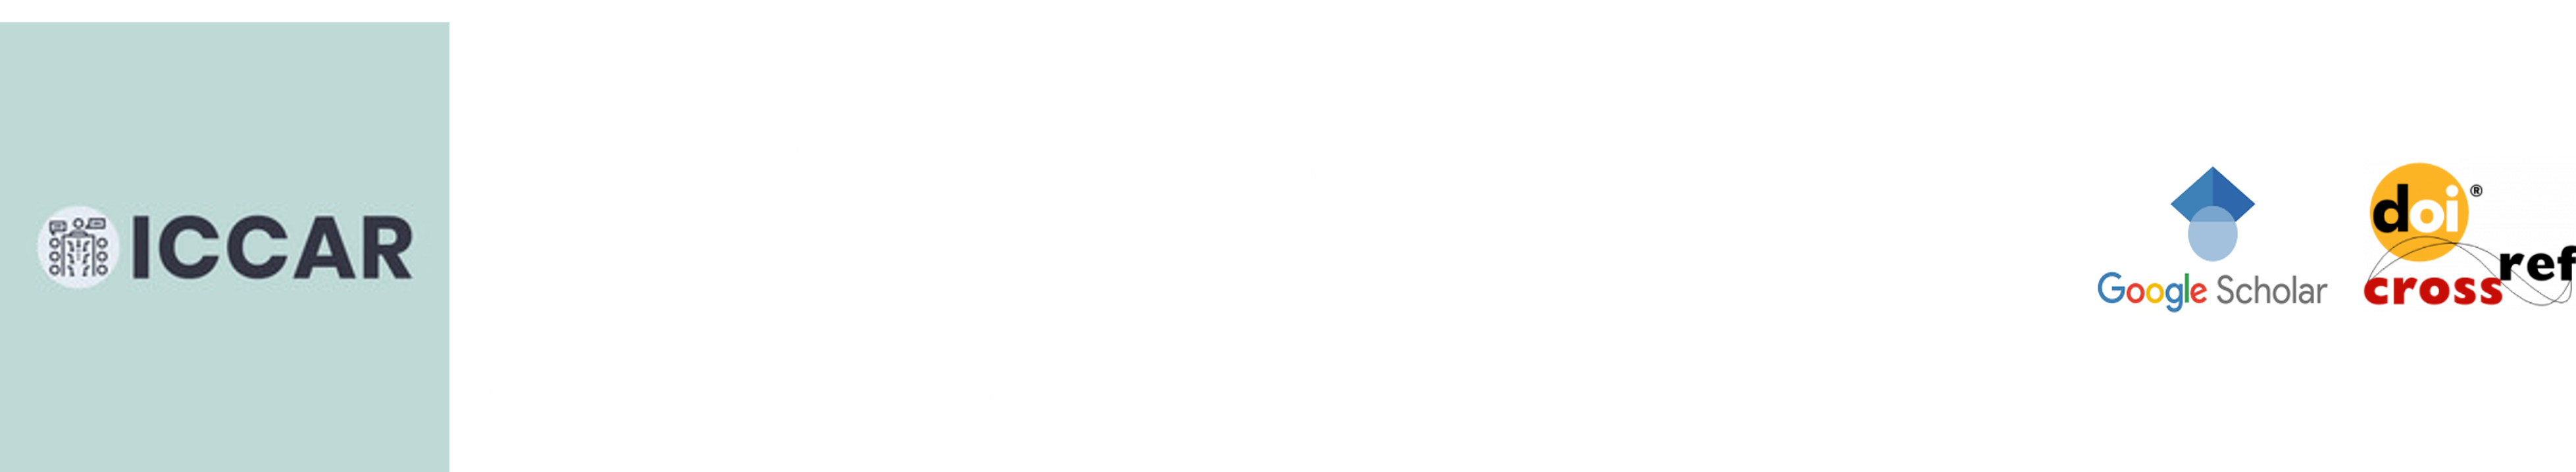 2nd International Conference on Contemporary Academic Research